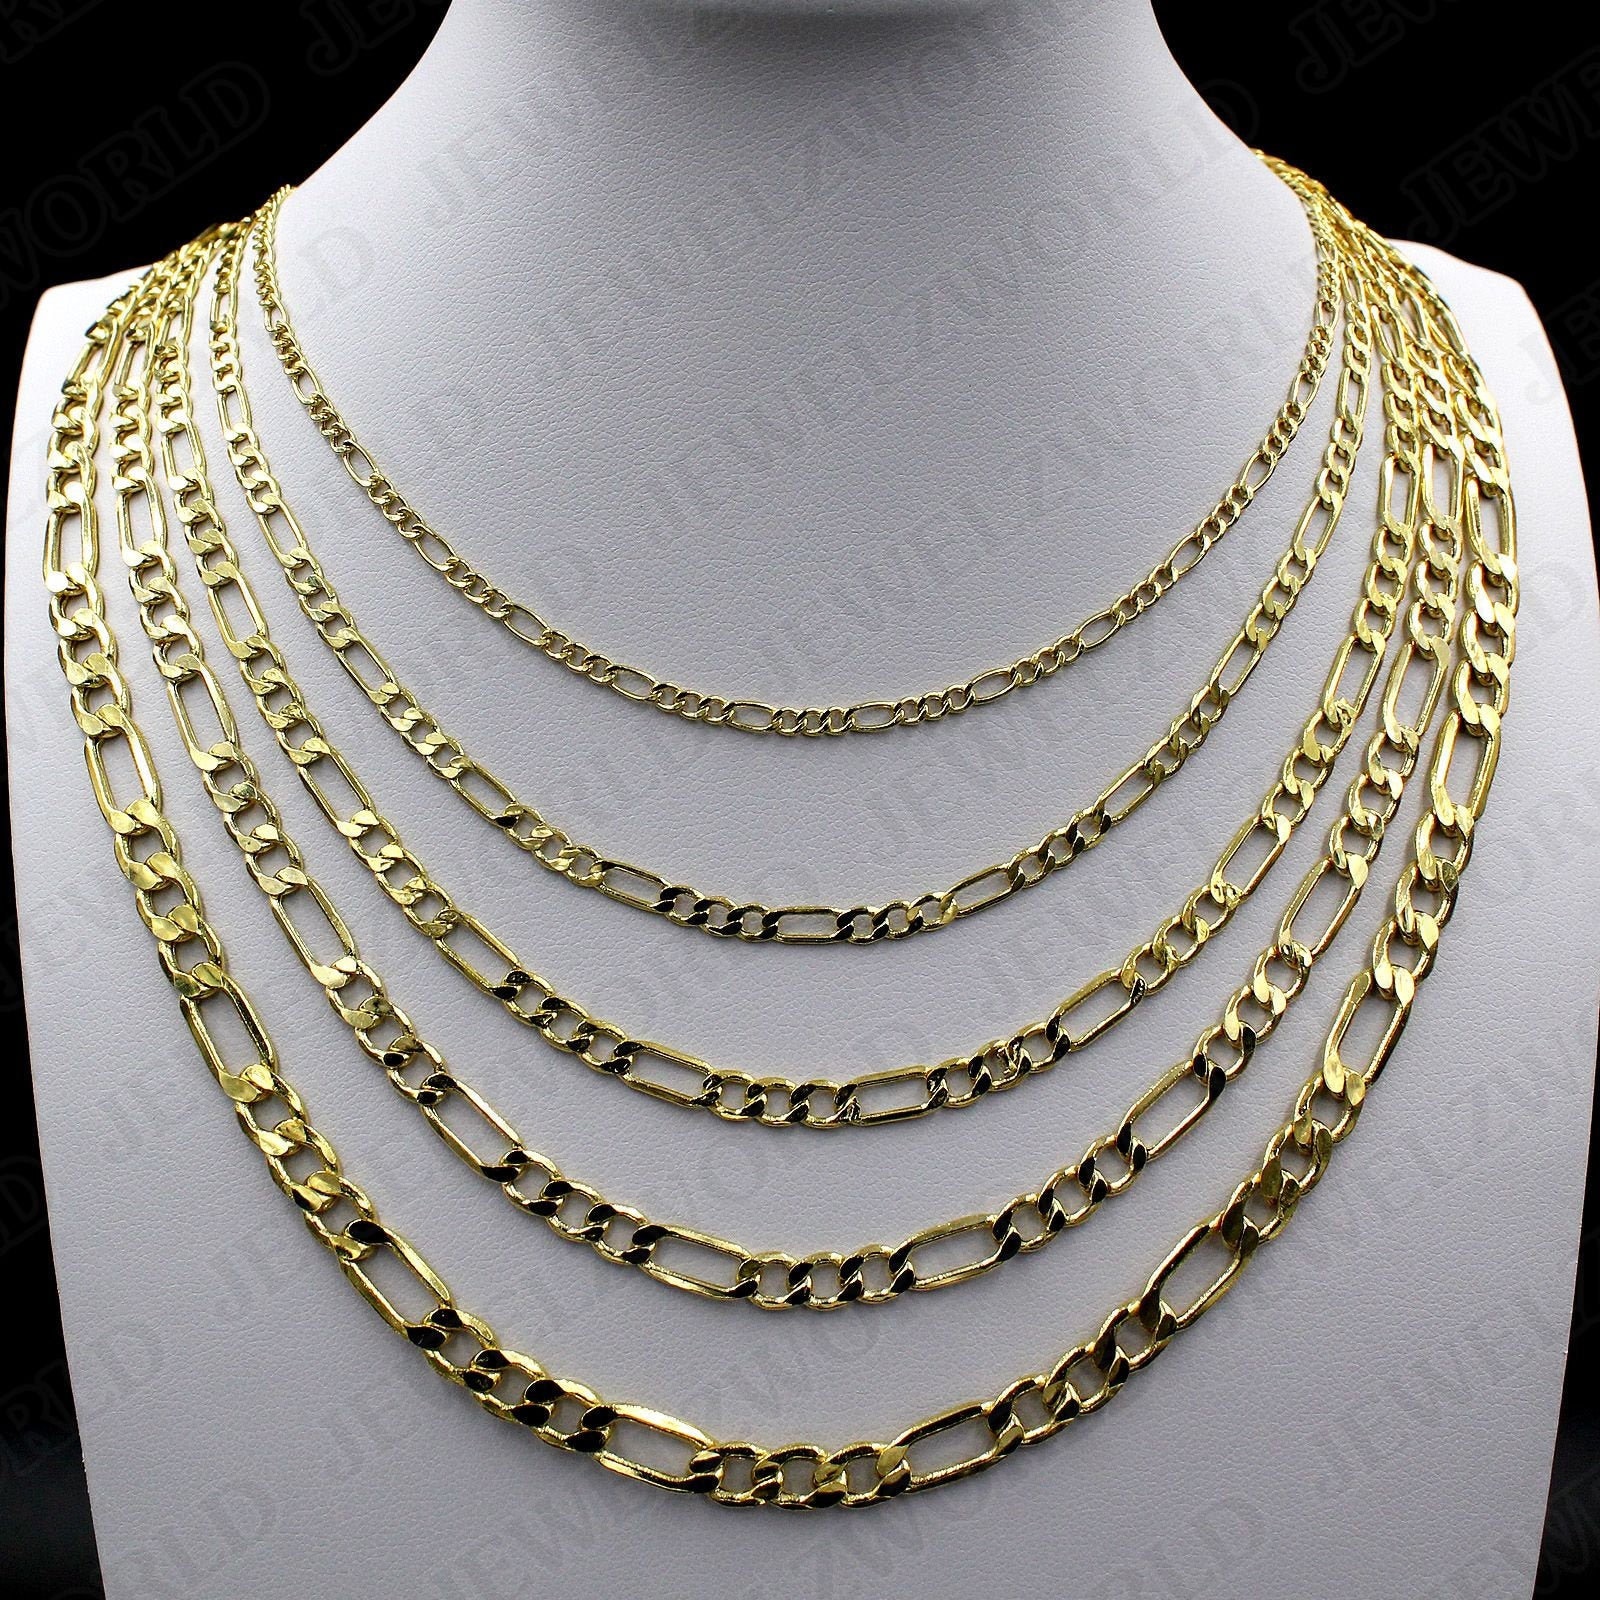 2mm Women Men 16-30" Stainless Steel Figaro Link Curb Chain Necklace Jewelry 